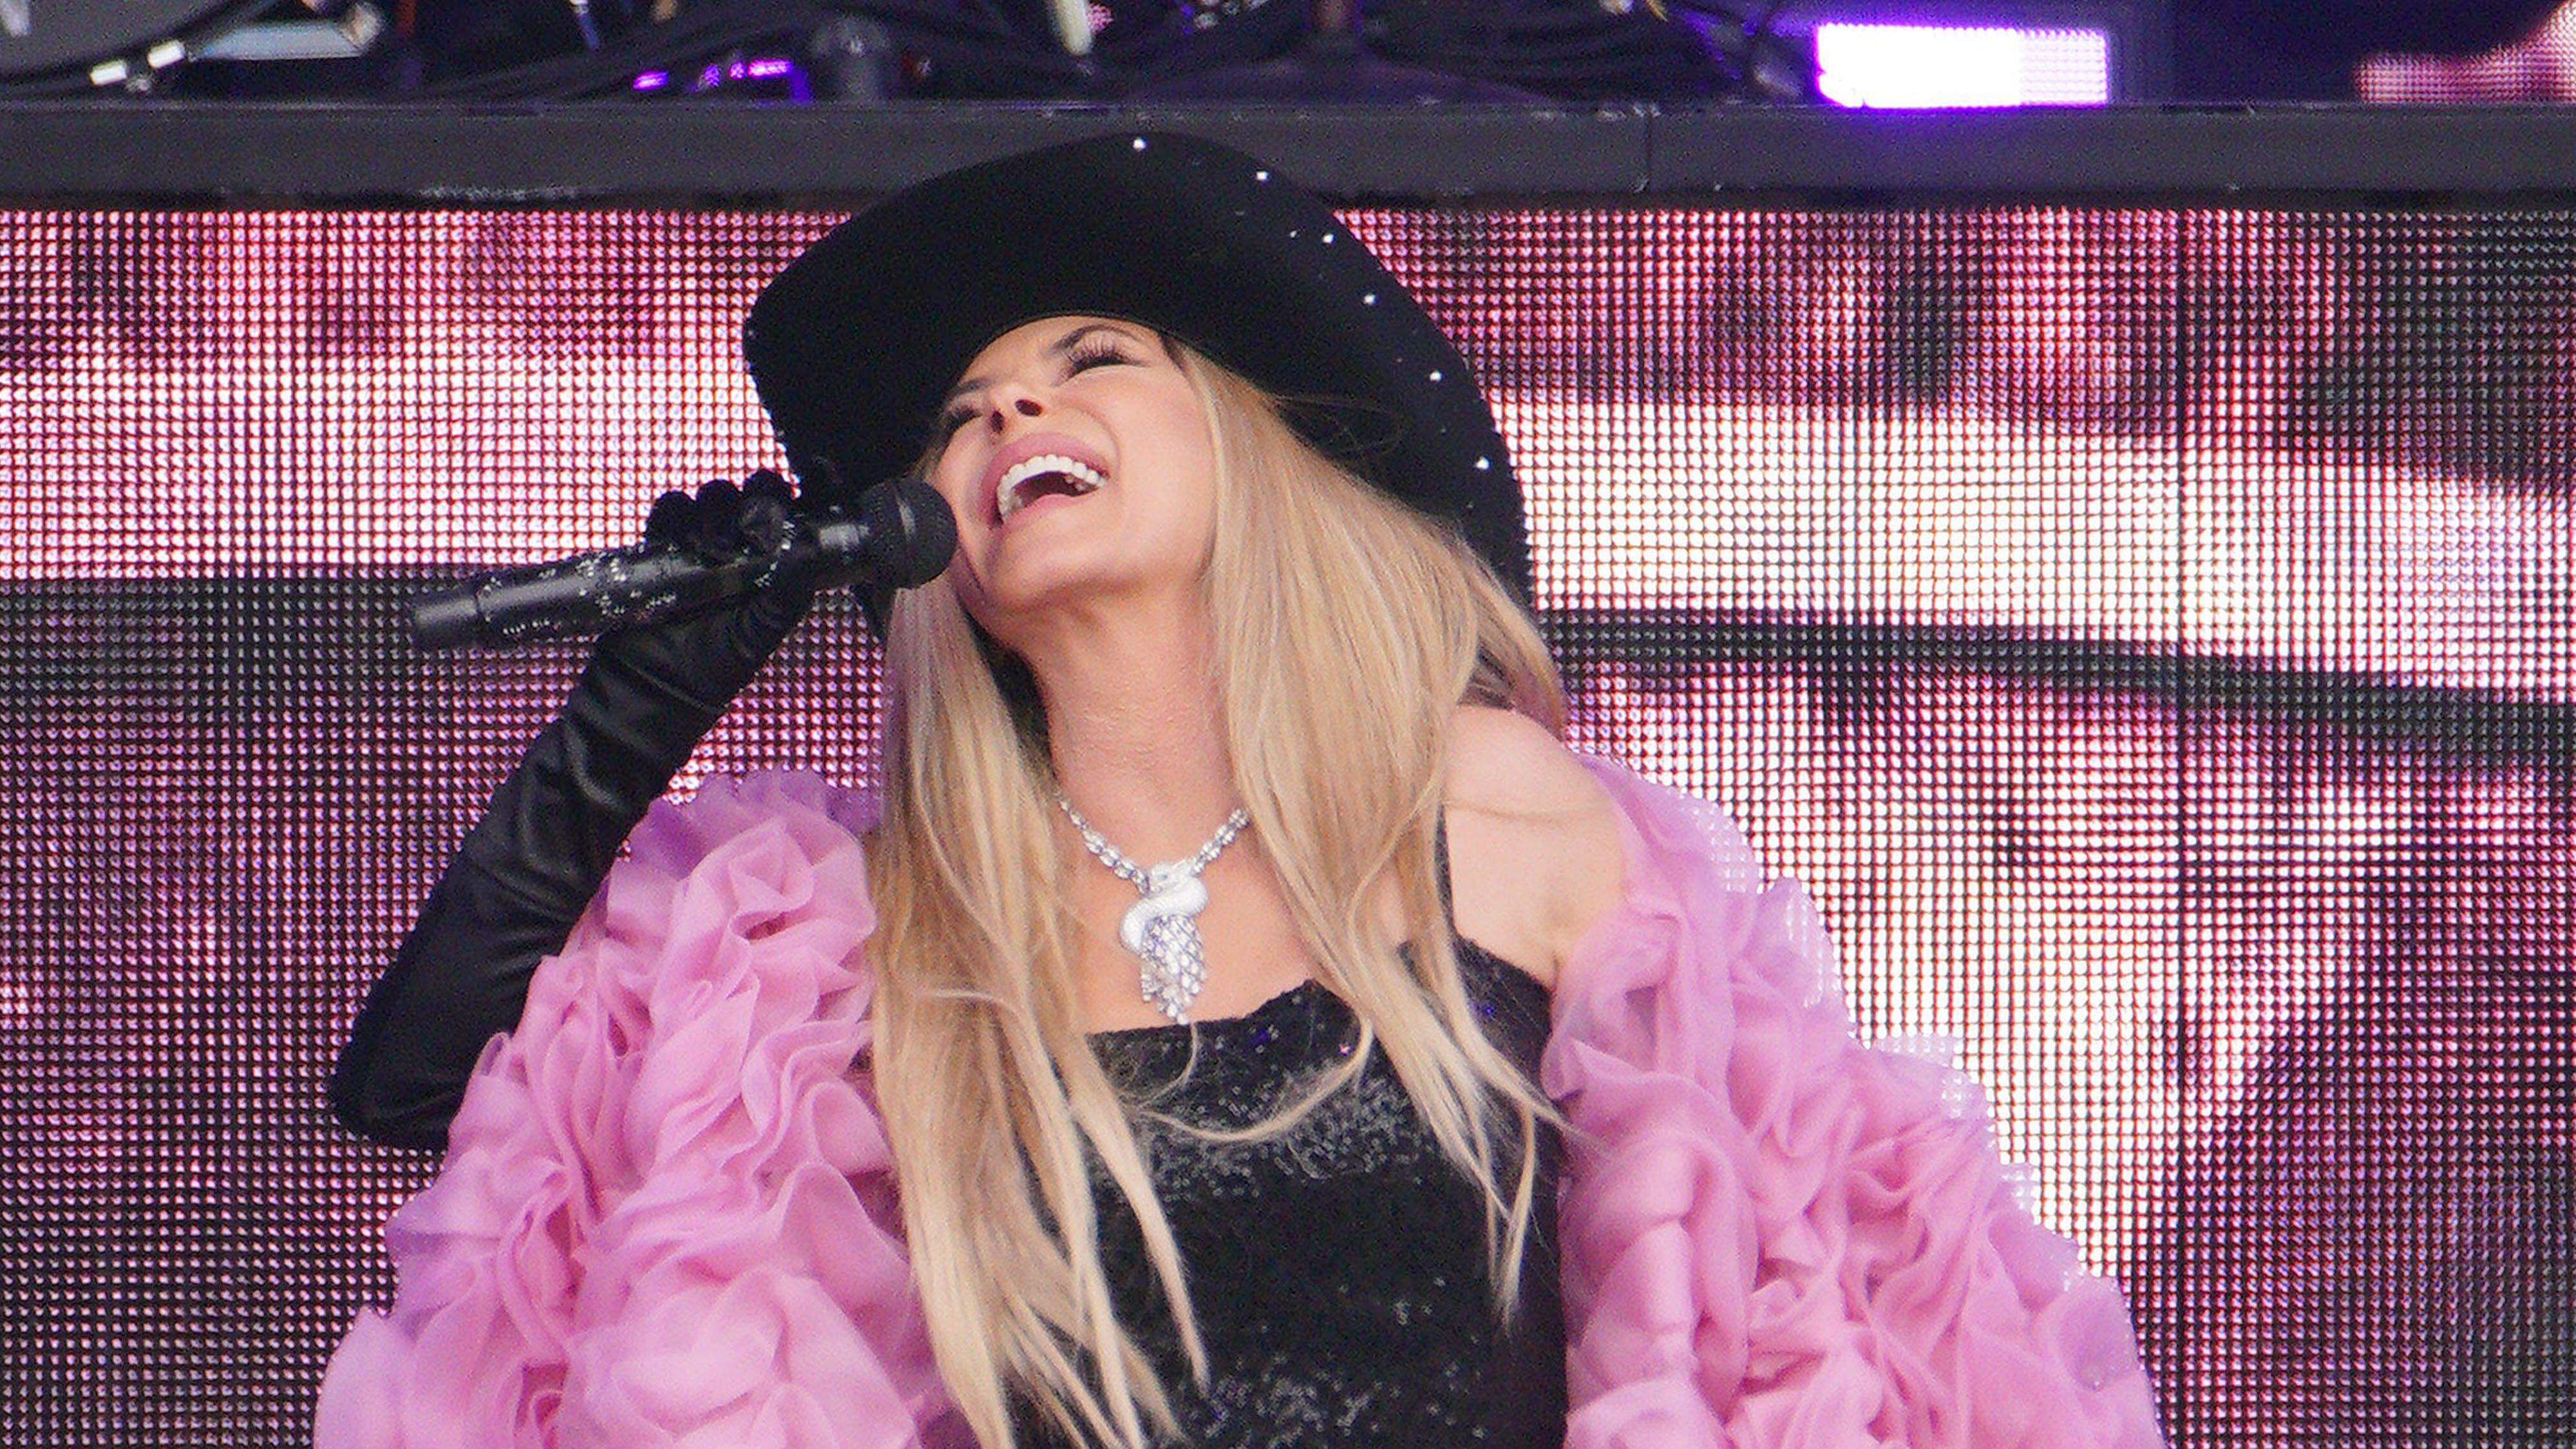 The Canadian country singer was performing on the Pyramid Stage